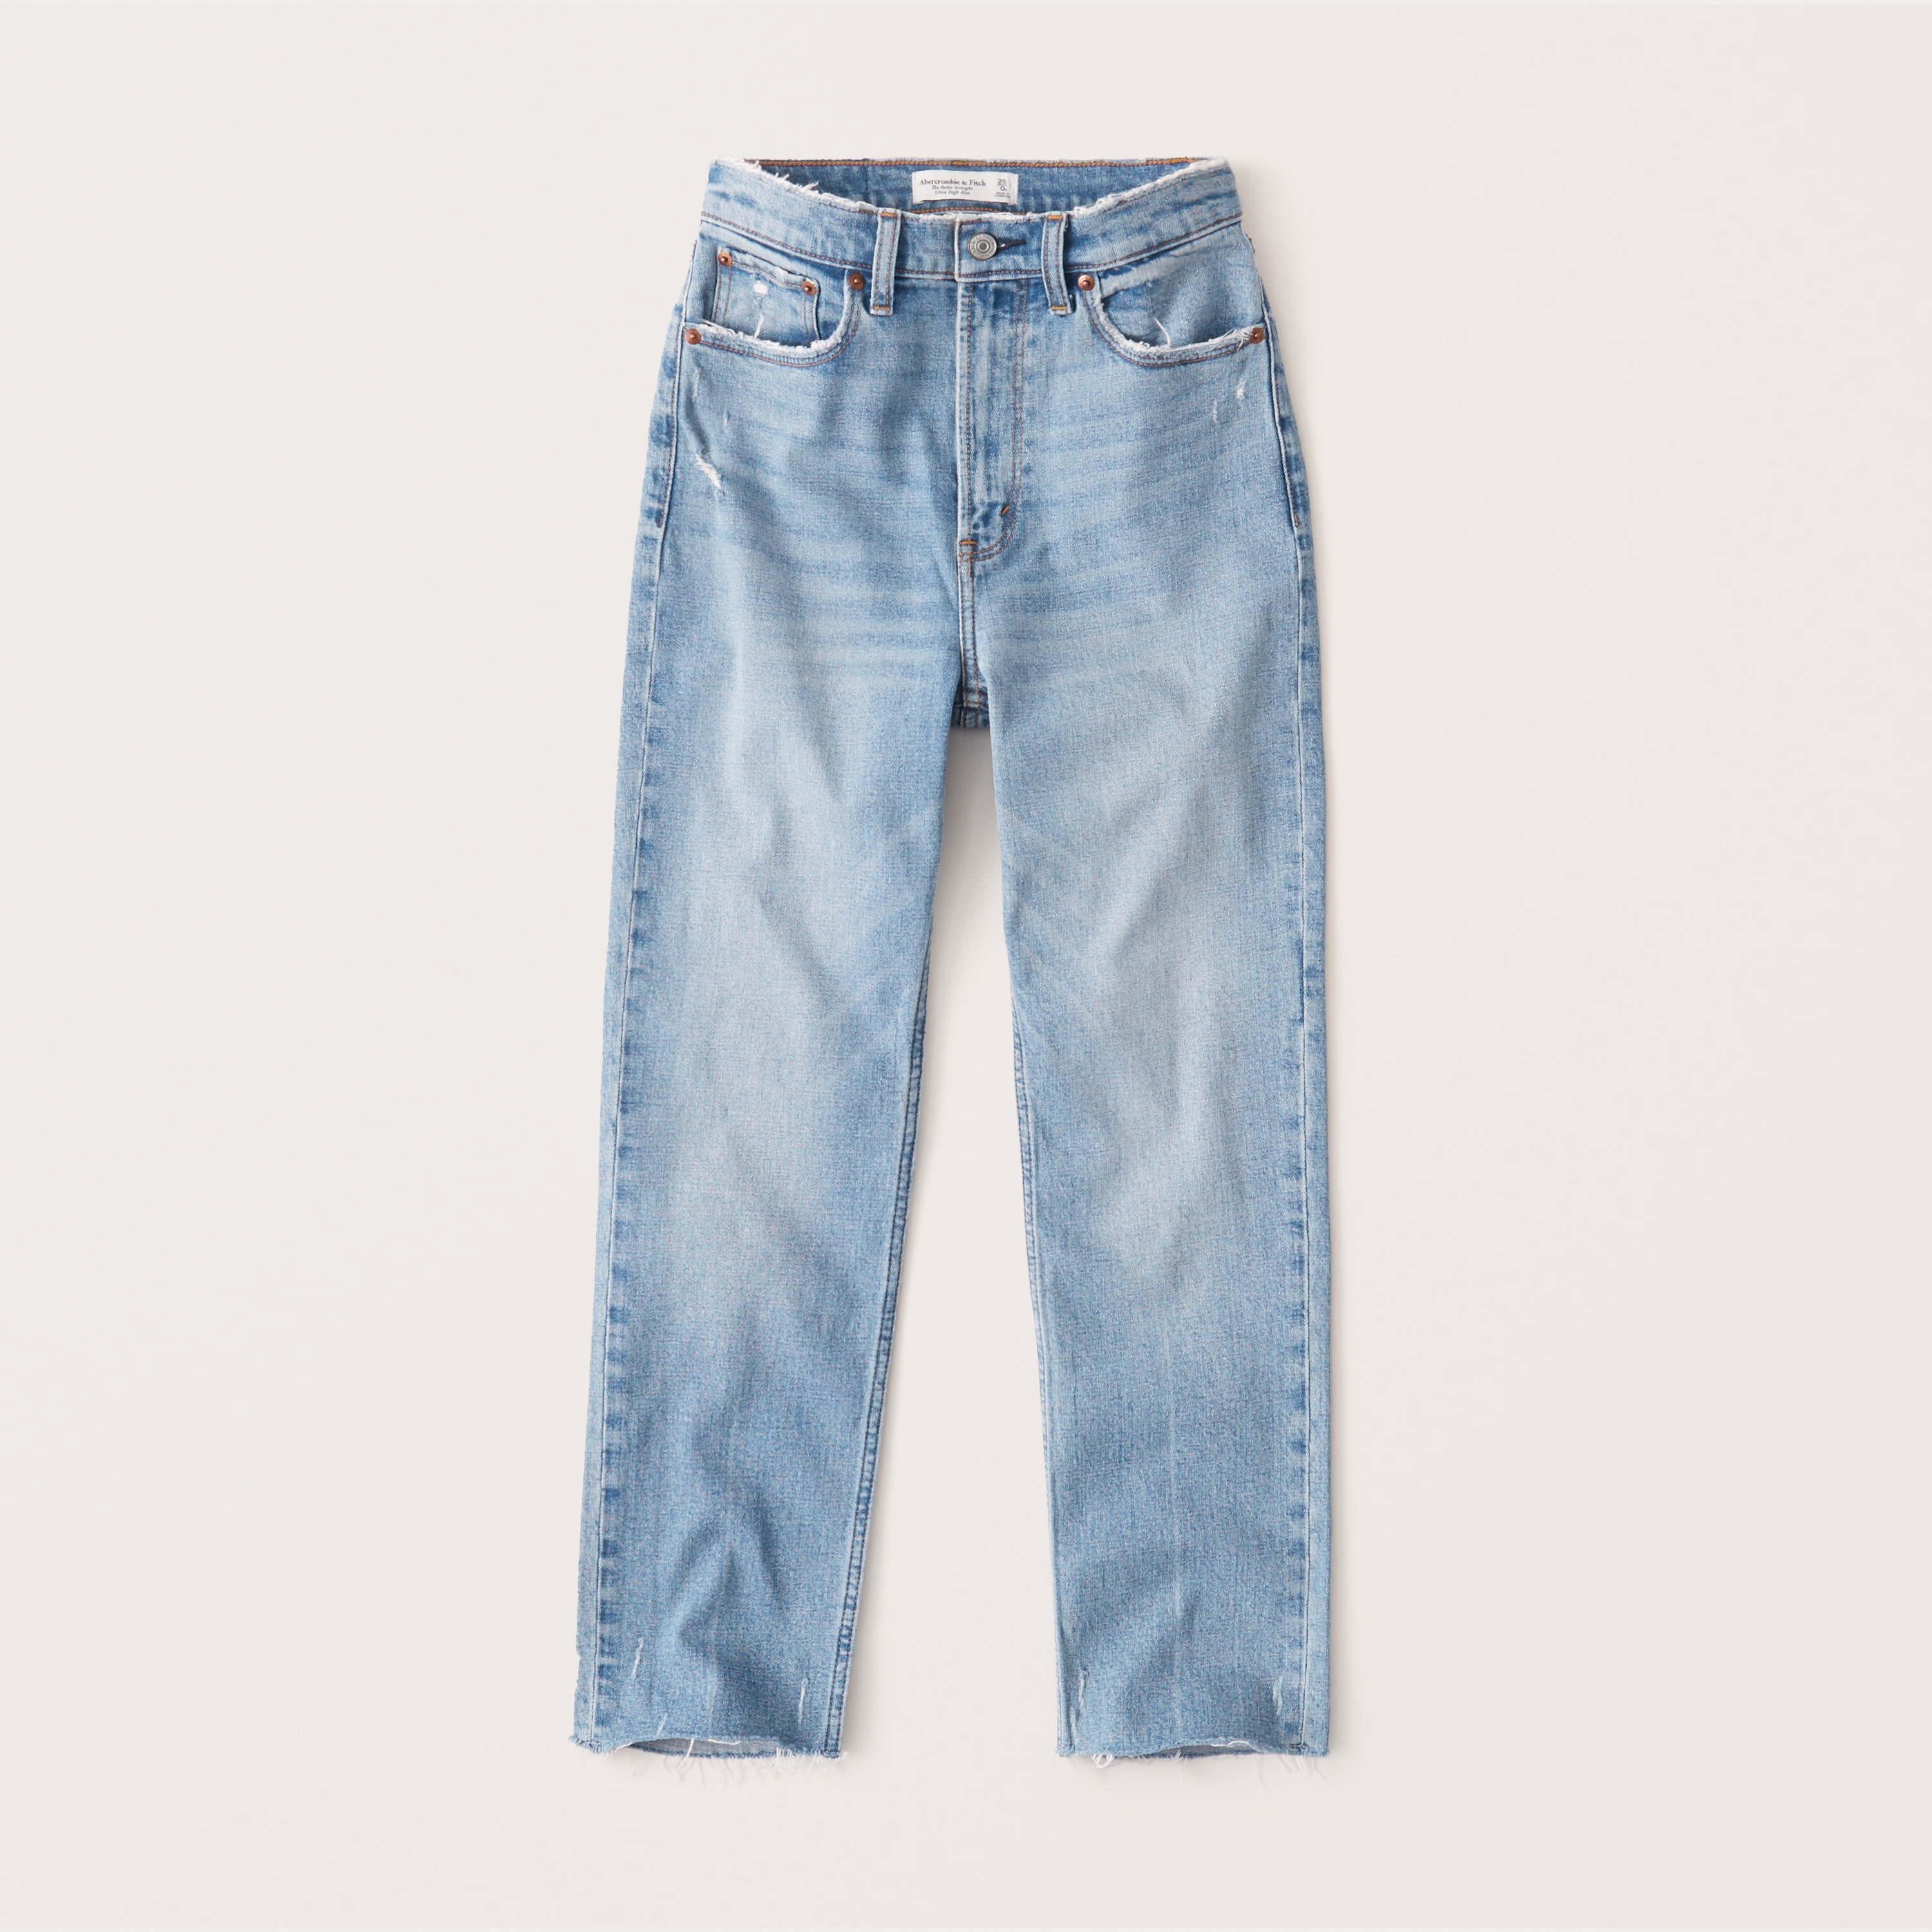 abercrombie & fitch straight pants